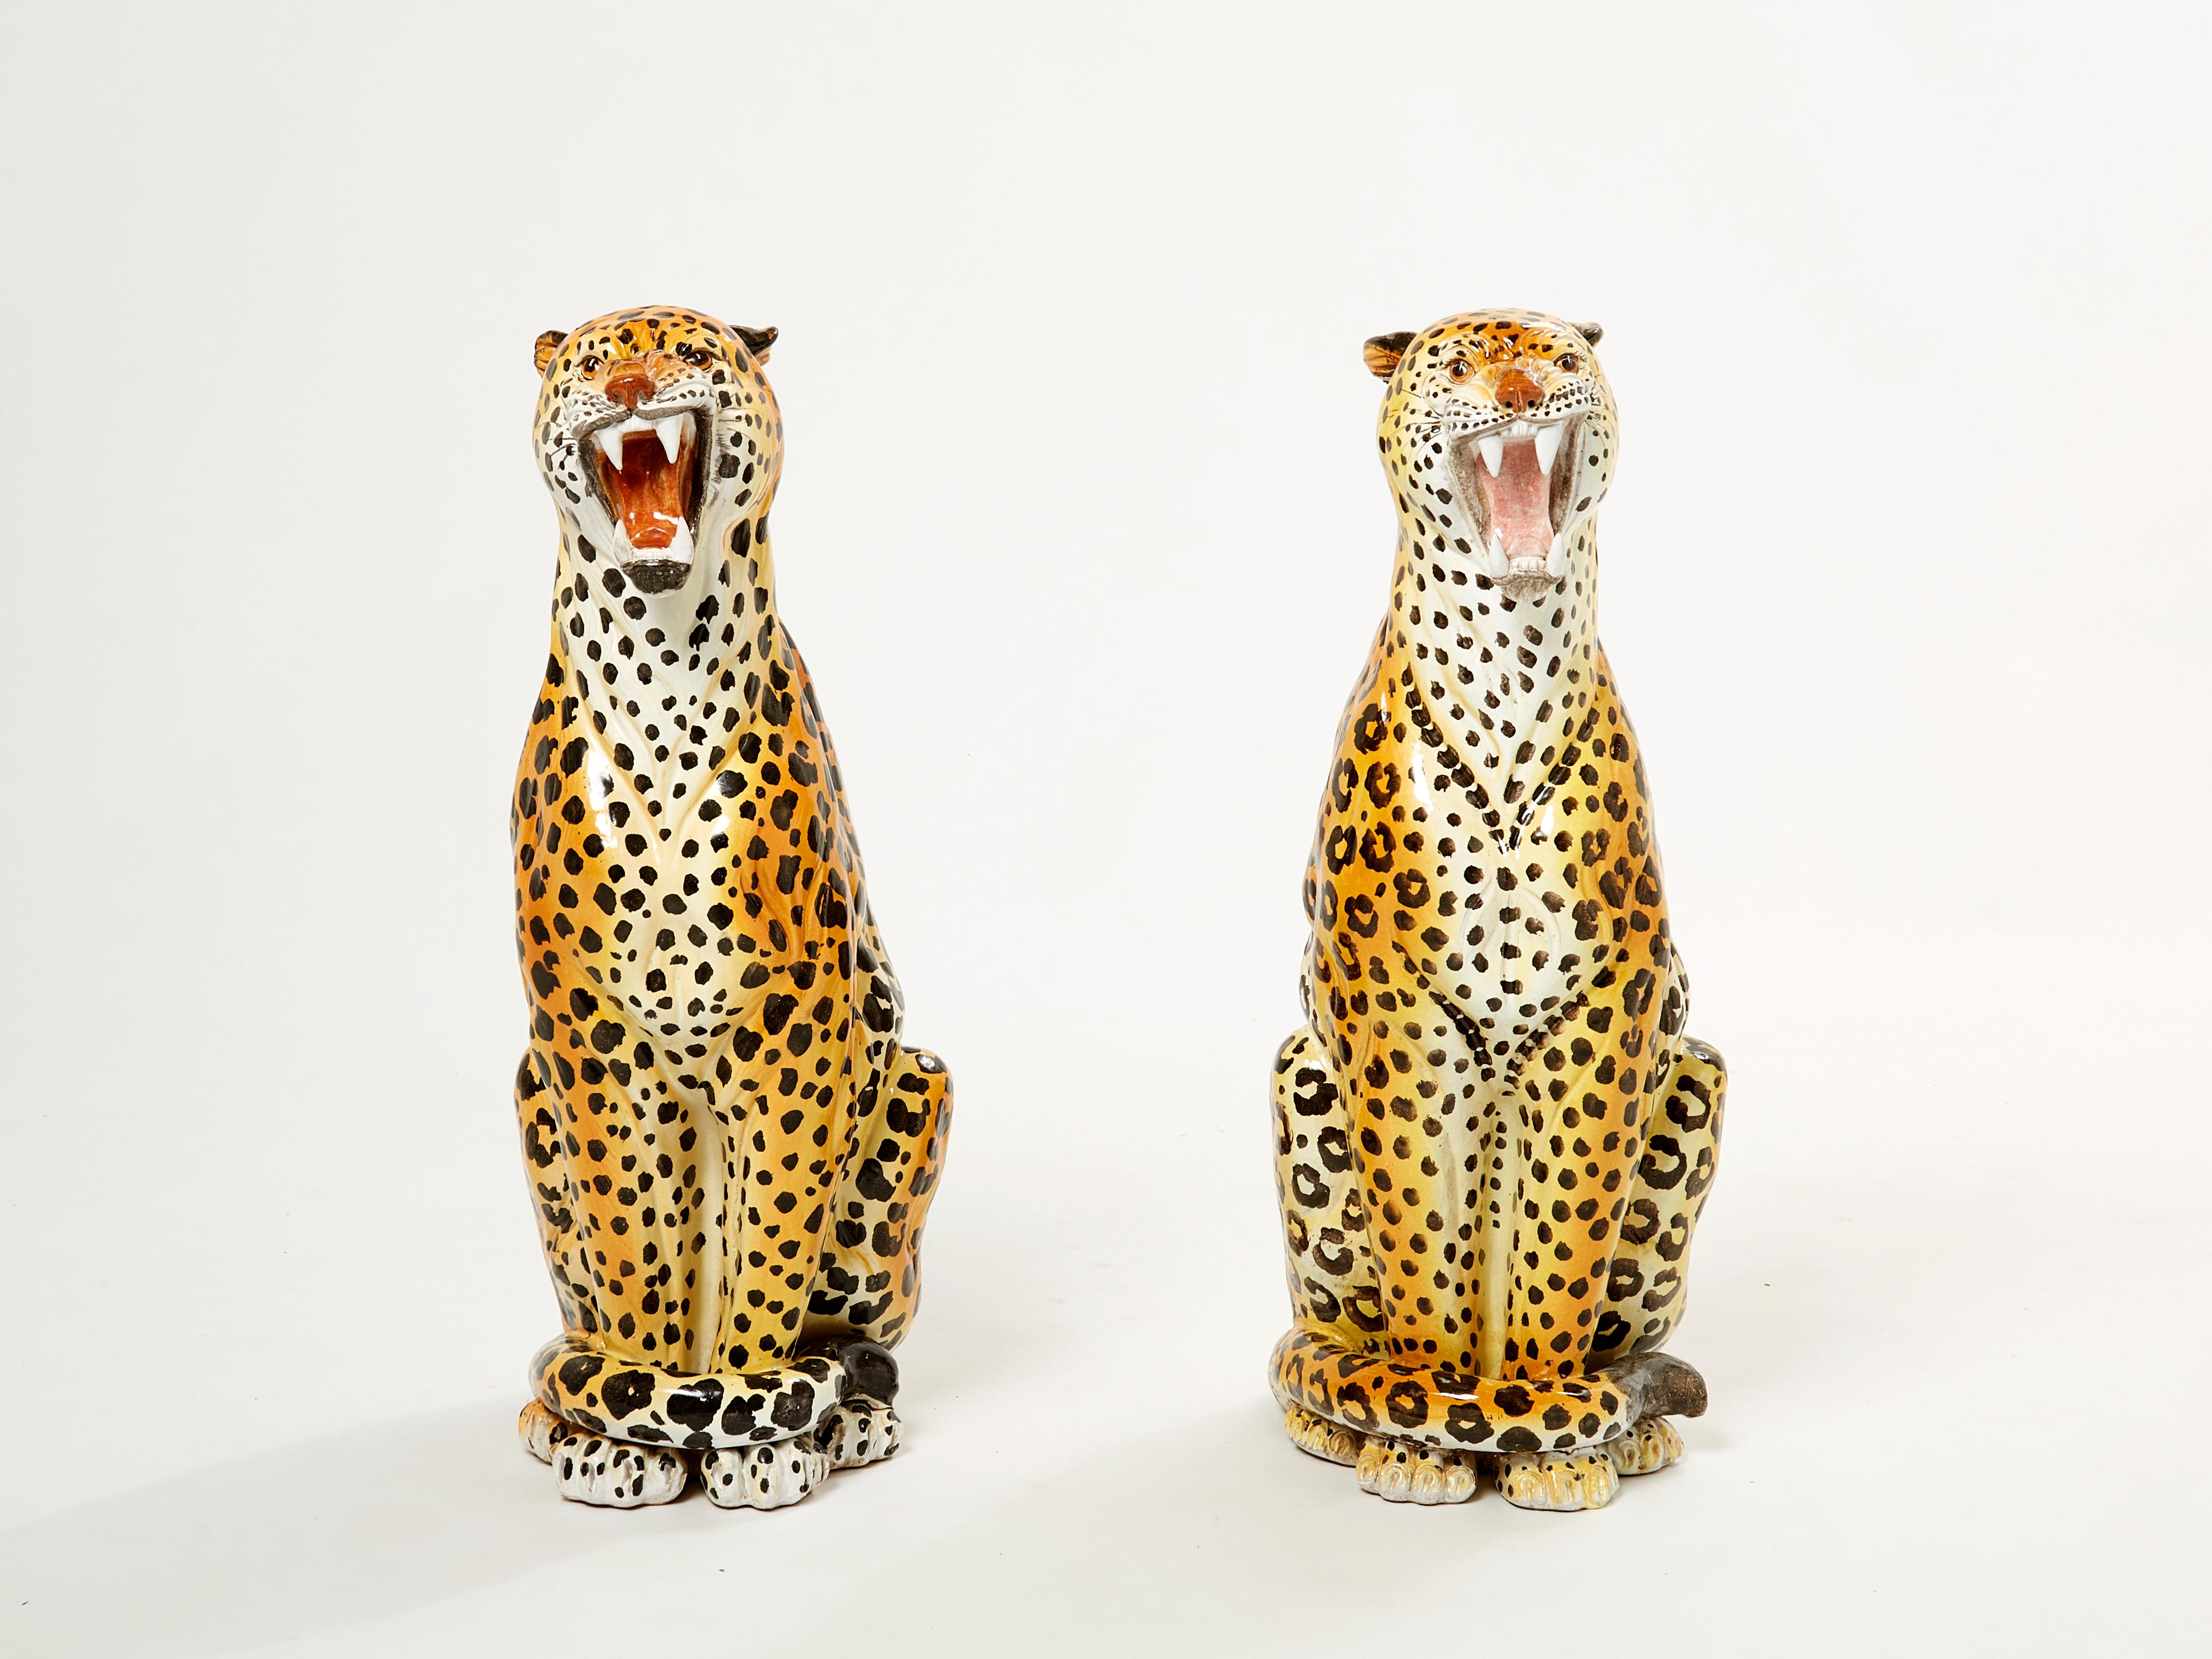 This is a beautiful set of vintage Italian glazed ceramic leopards, male and female, made in Italy in the 1960s. The two sculptures are large and life-size, and are in very good vintage condition, with a lovely patina on them. They were